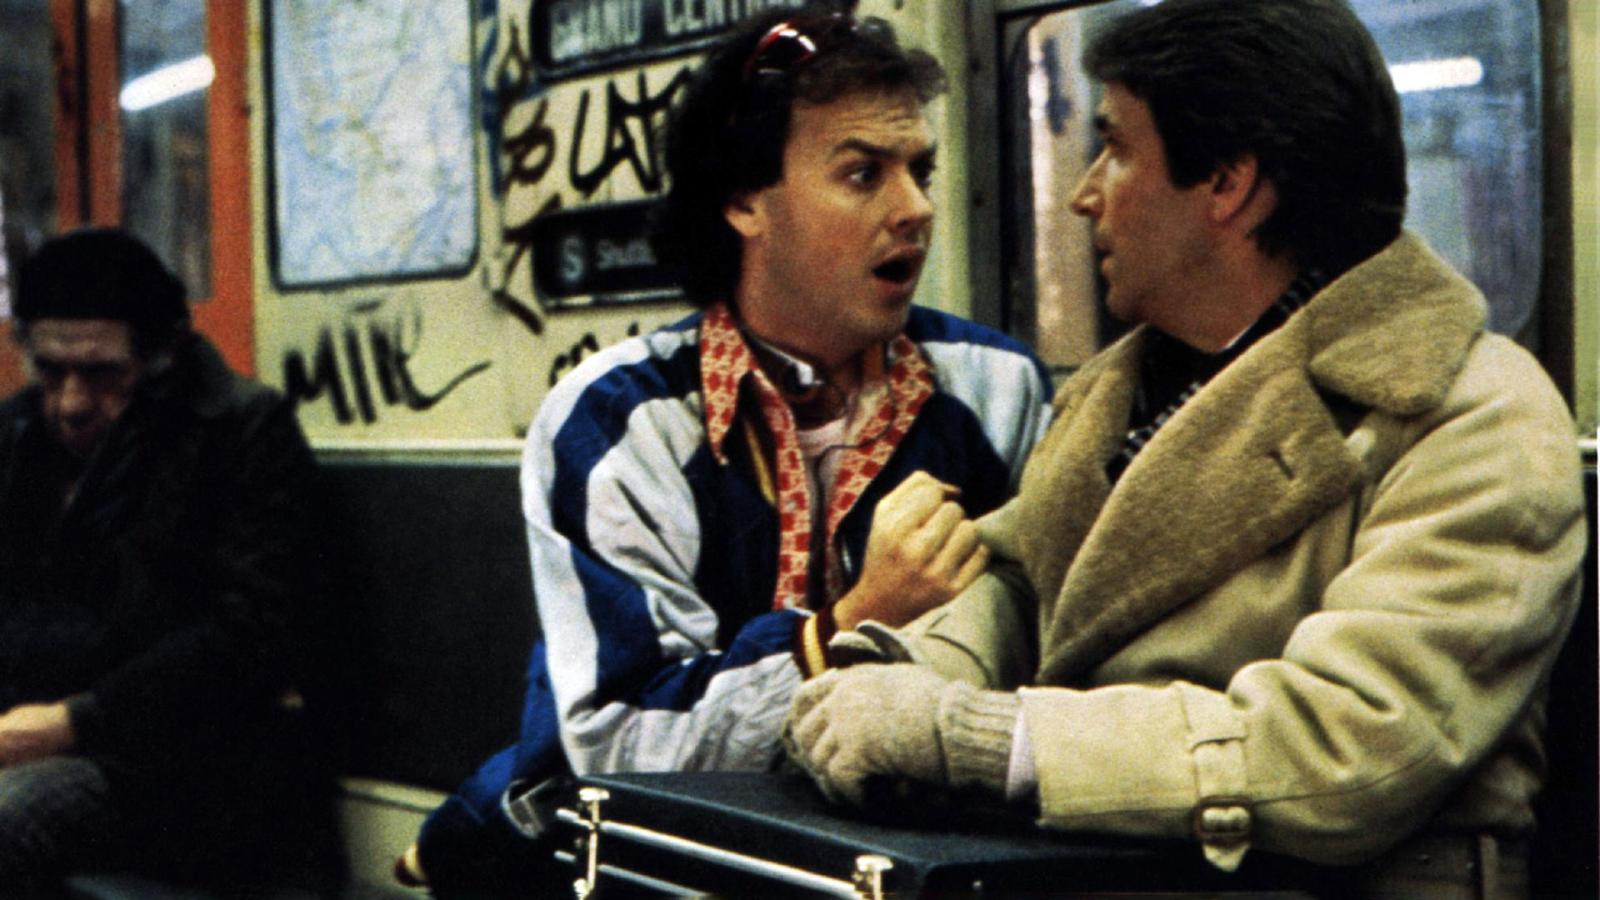 15 Most Underrated Comedy Movies of the 1980s, Ranked - image 15